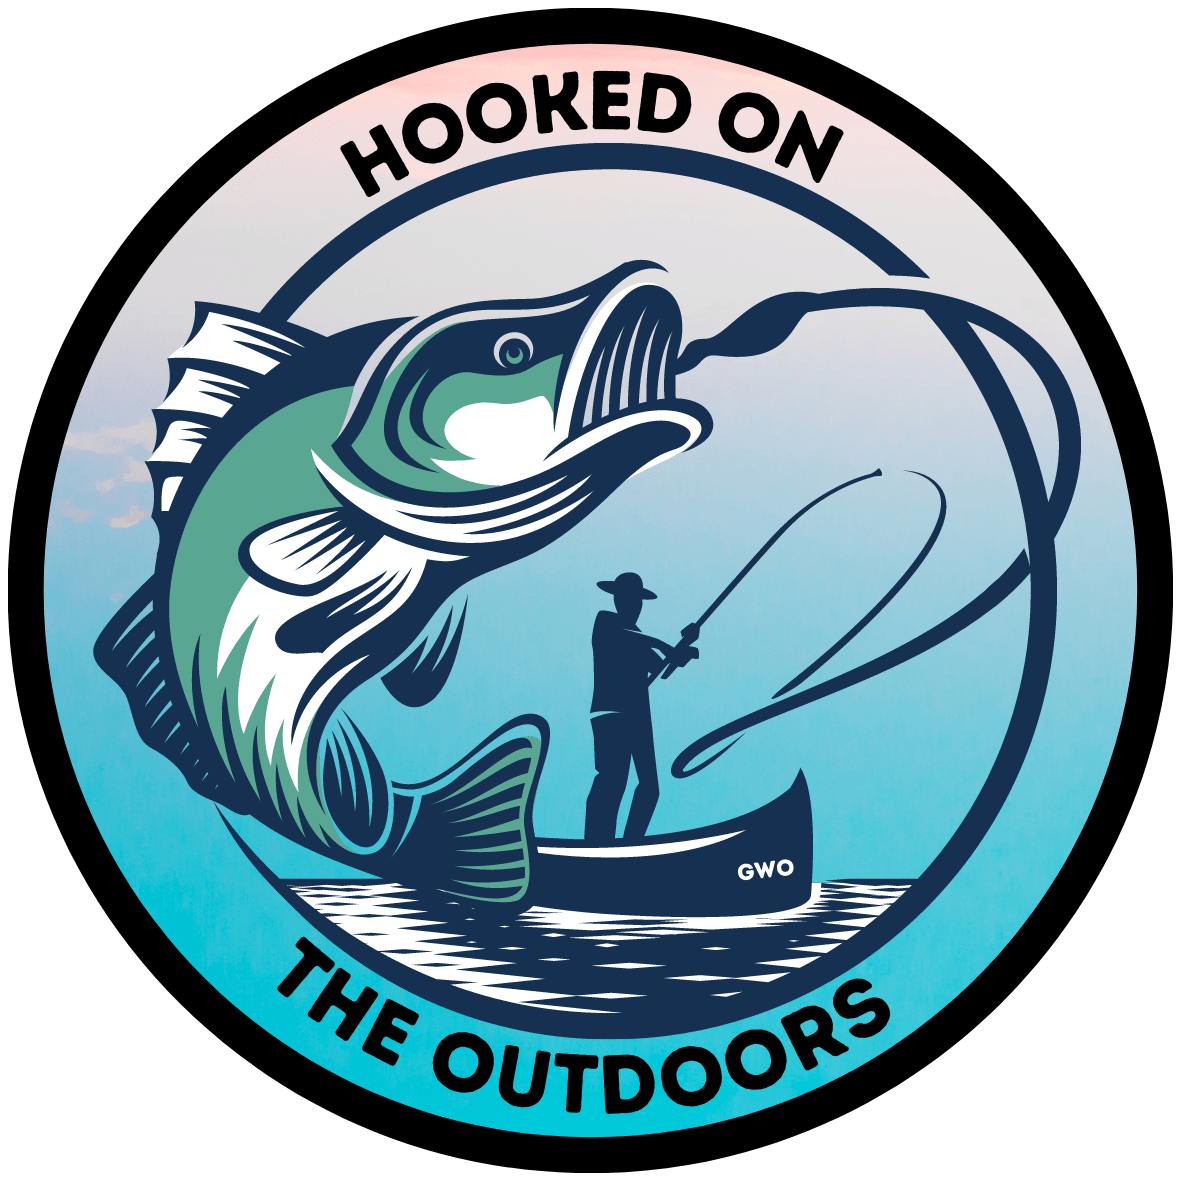 Hooked On The Outdoors Sticker - Go Way Out